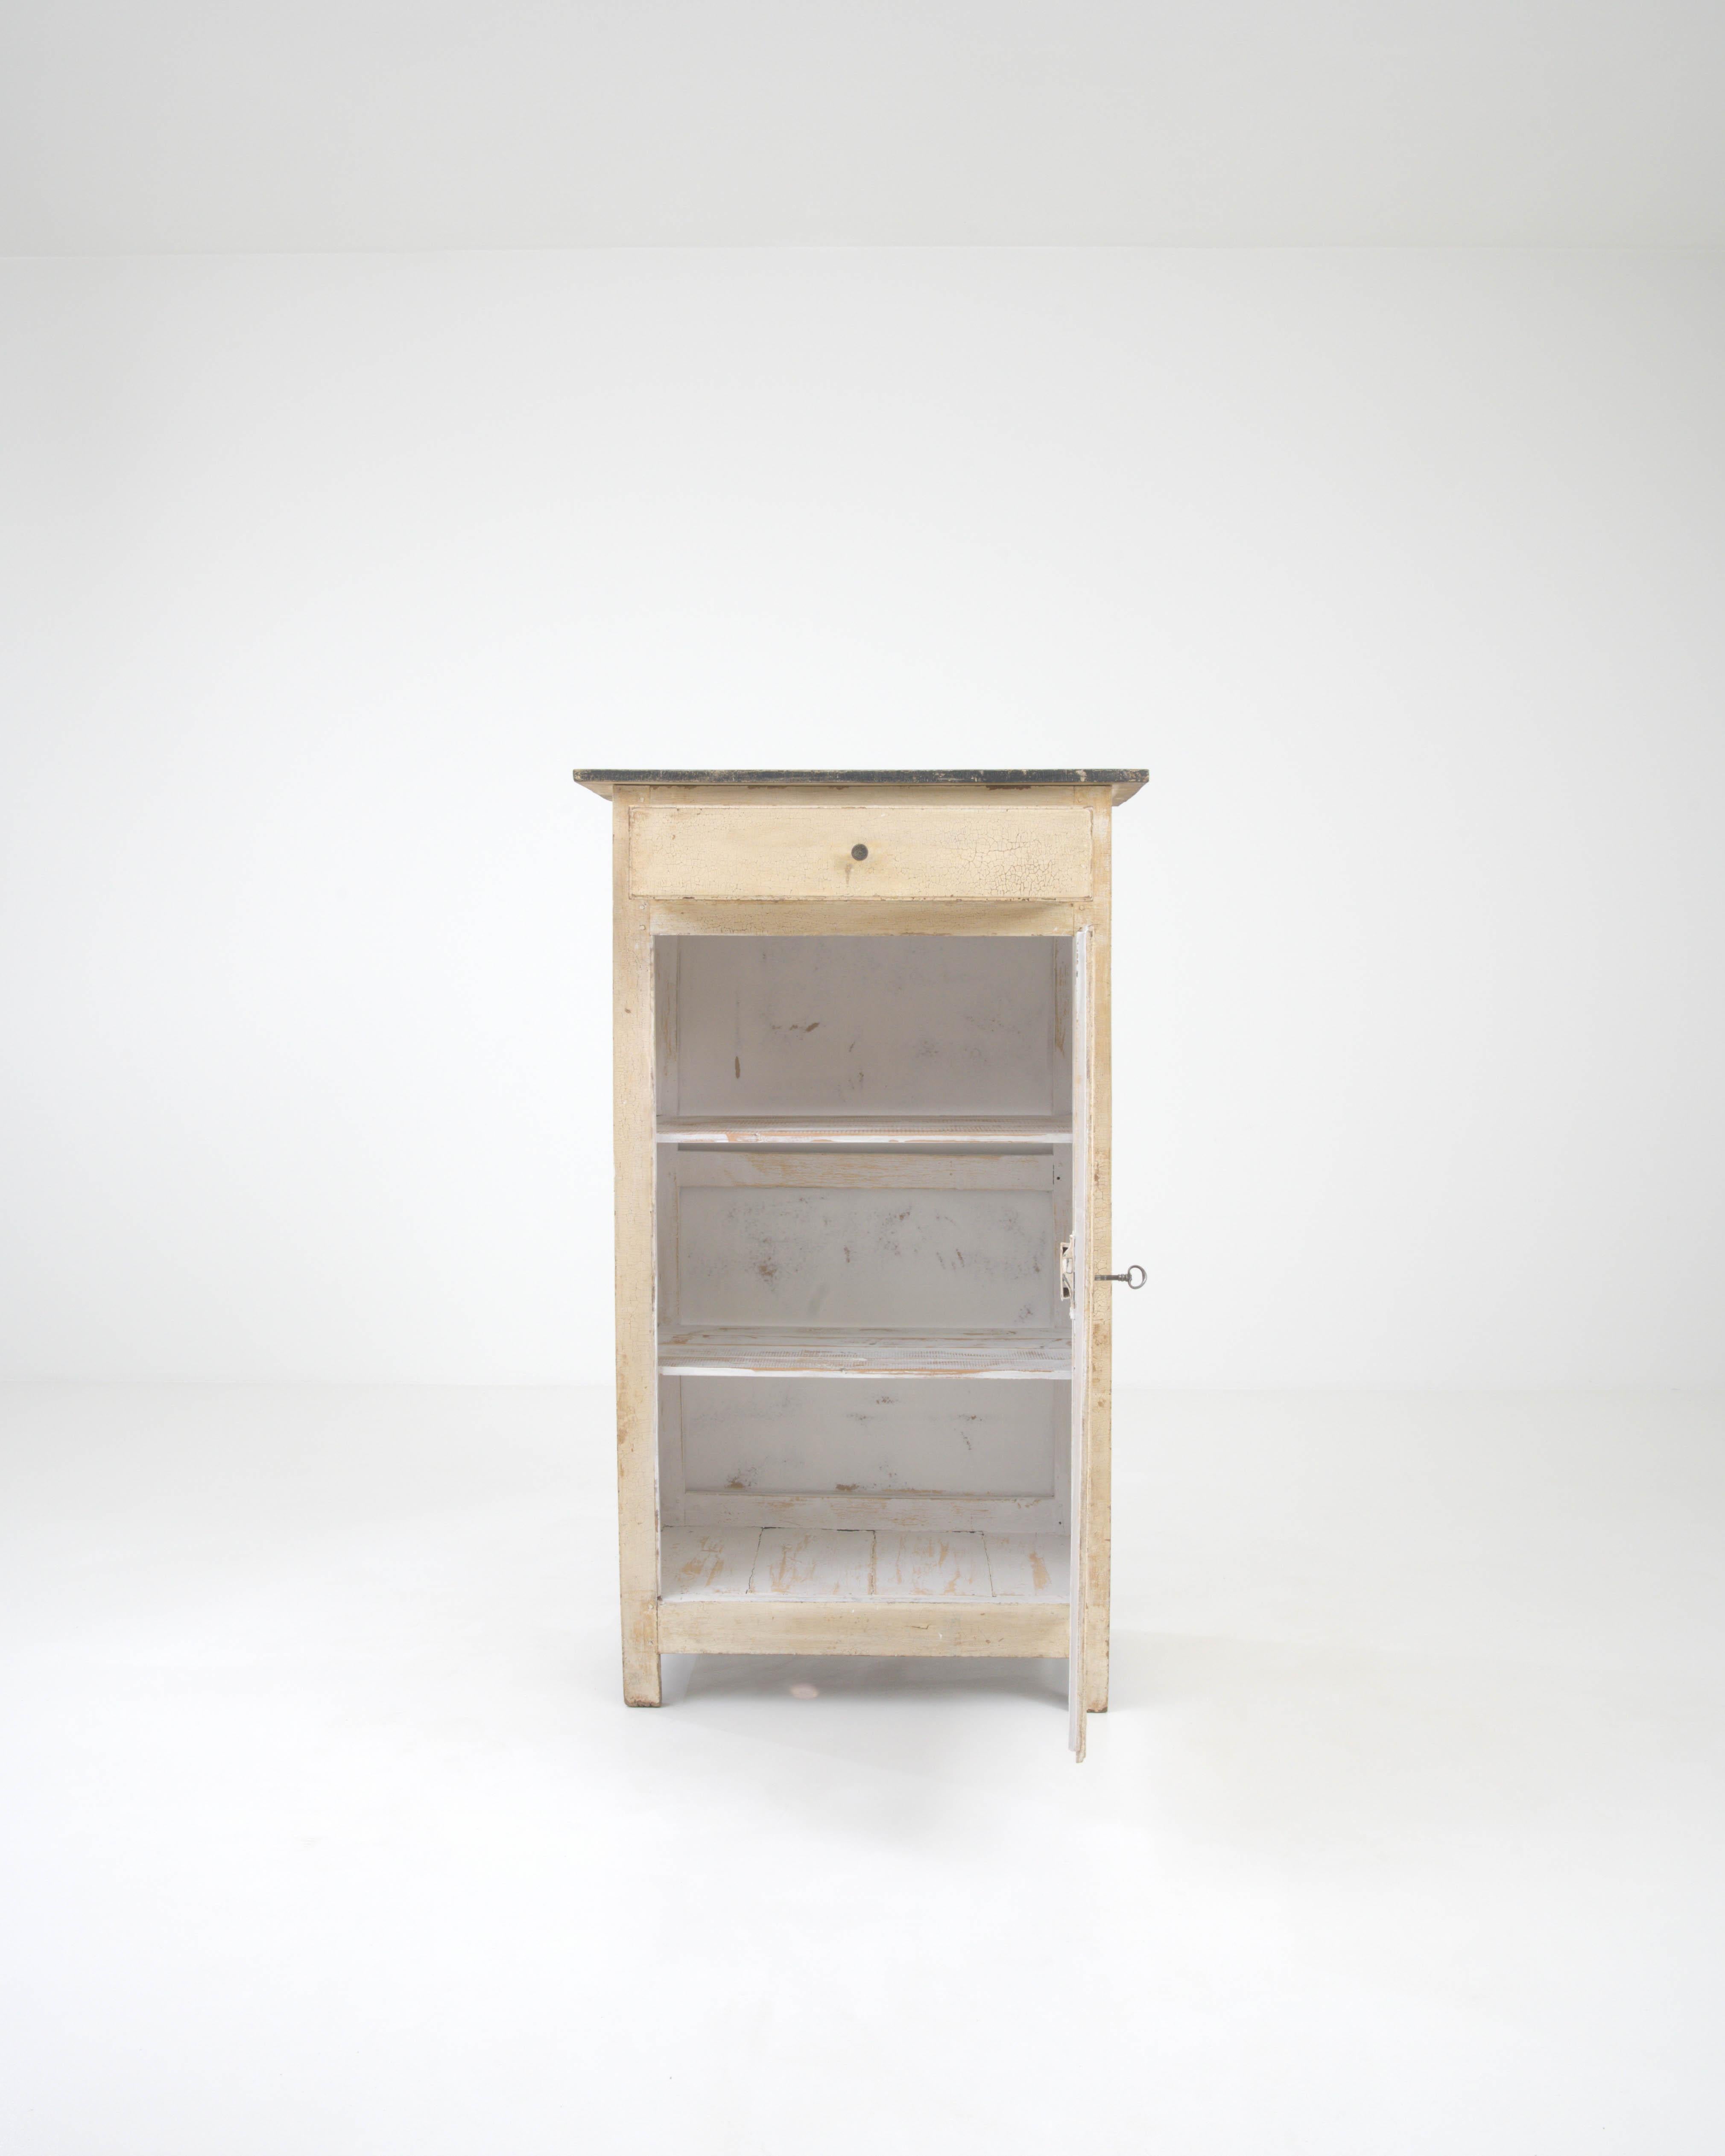 Discover the rustic charm of this 19th-century French cabinet, a piece that exudes character with its richly patinated wood and authentic crackle finish. The cabinet's compact dimensions reveal a thoughtful design, making it an ideal addition to